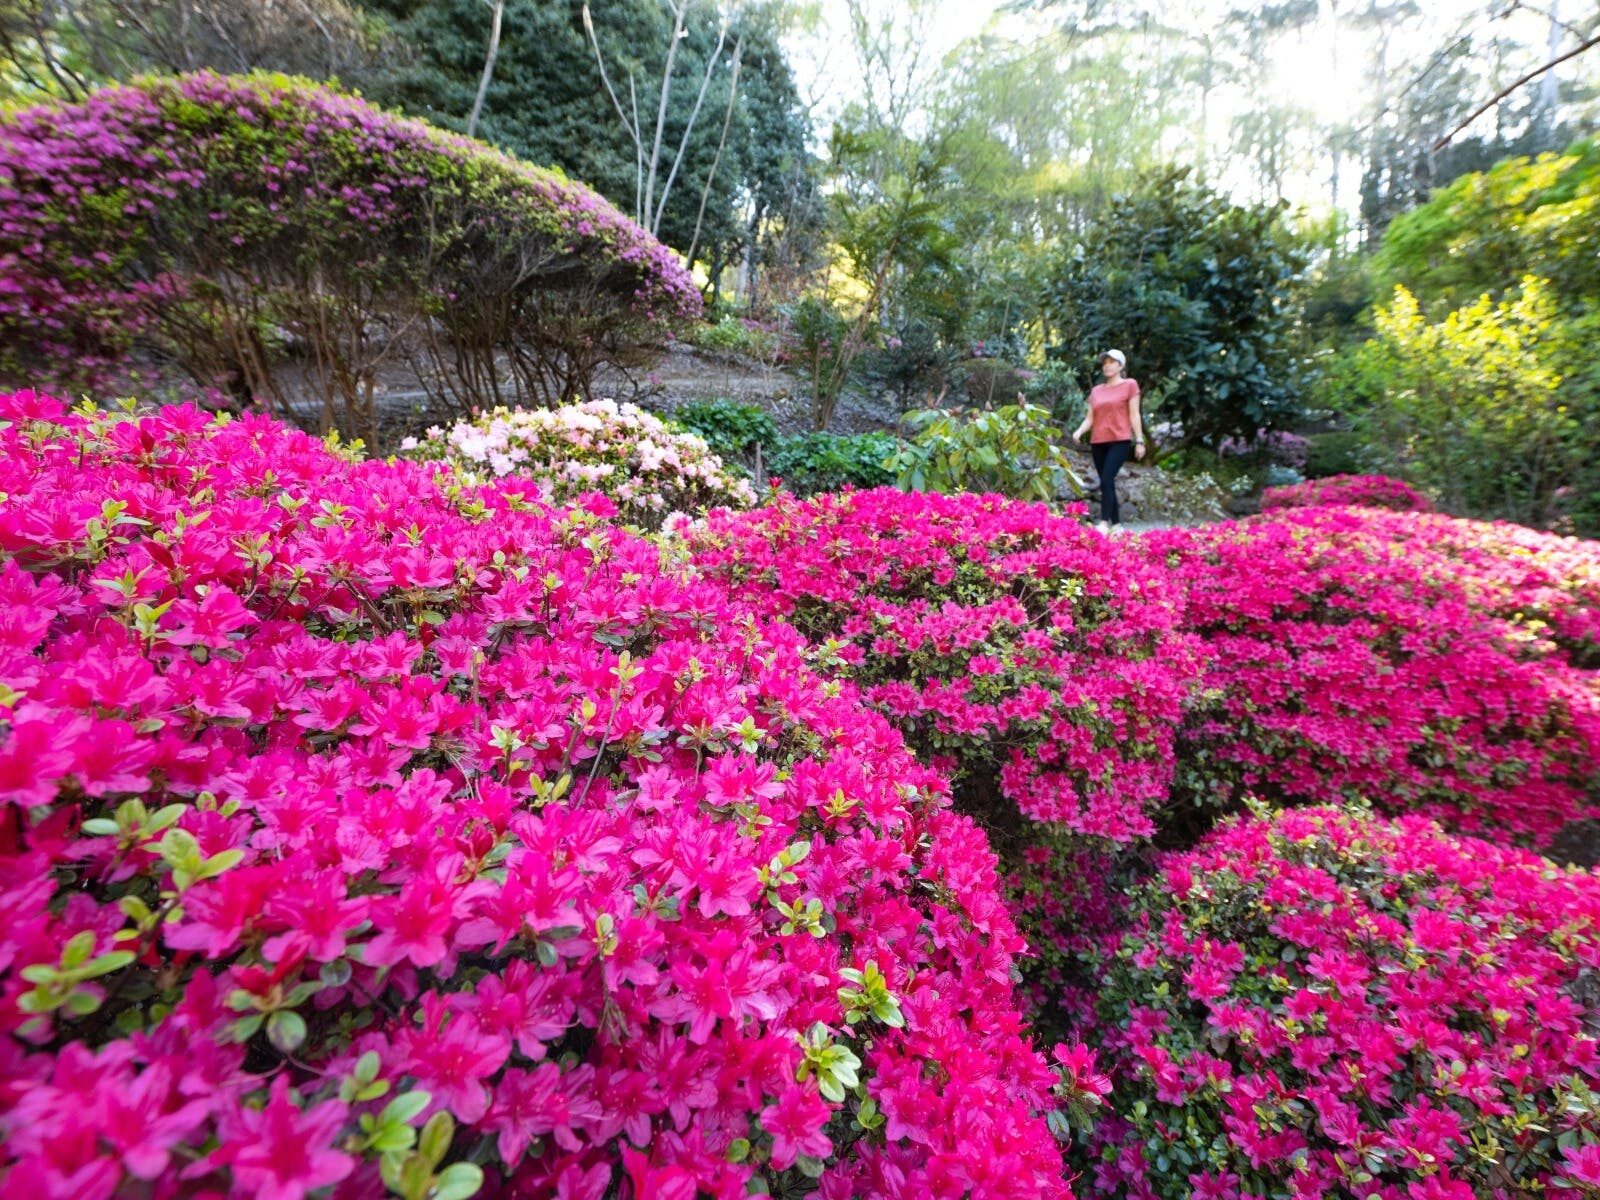 A mass of pink flowers on a bush are at the front with a person walking at the back